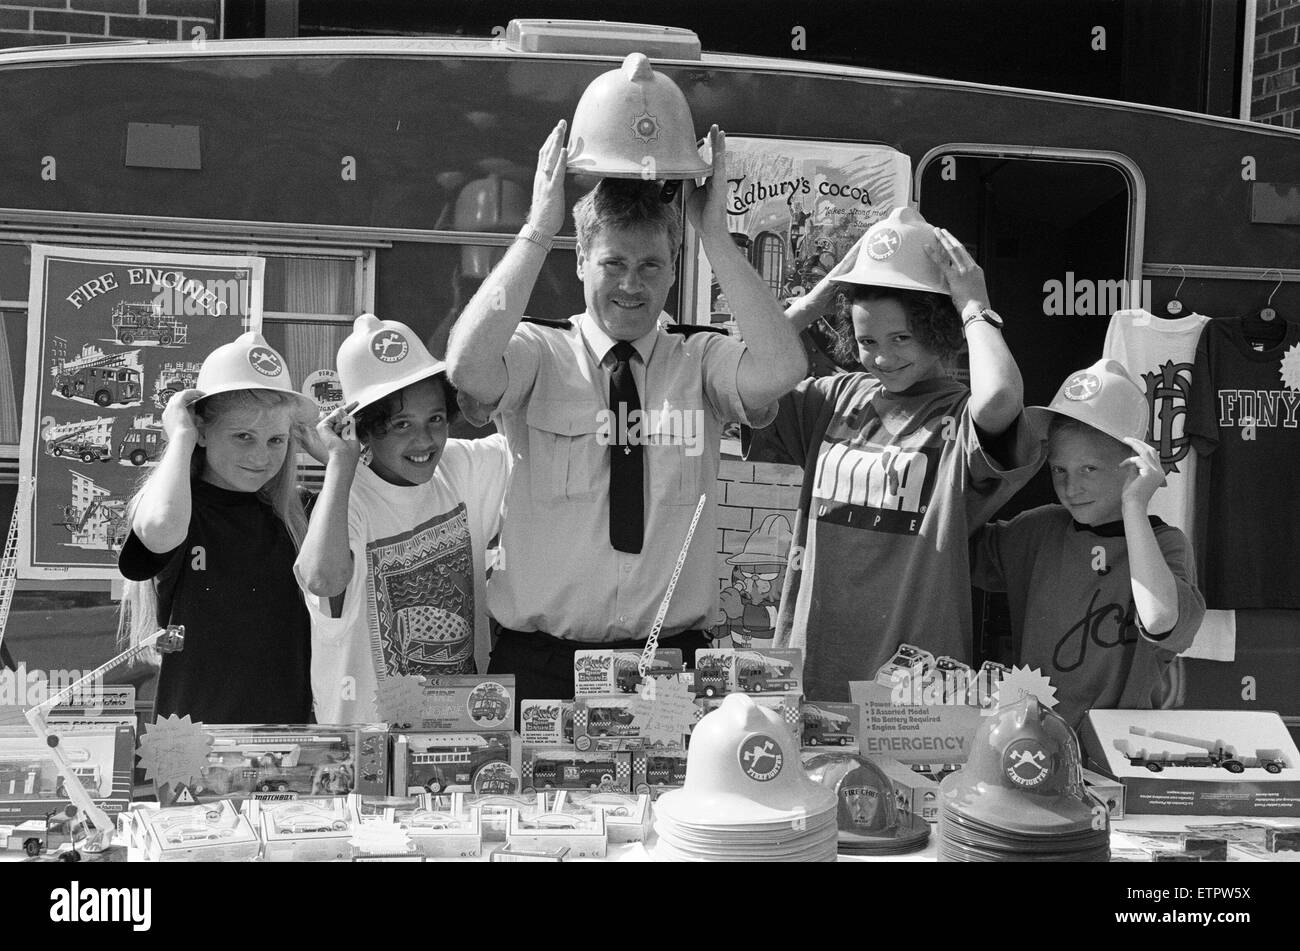 Fireman Paddy Flaherty made sure these youngsters had the right hat of the occasion when they visited Slaithwaite Fire Stations open day yesterday. Trying on minature firemen's helmets are (from left) Corinne Johnson, Angela Sykes, Katie Sykes and Karen O Stock Photo